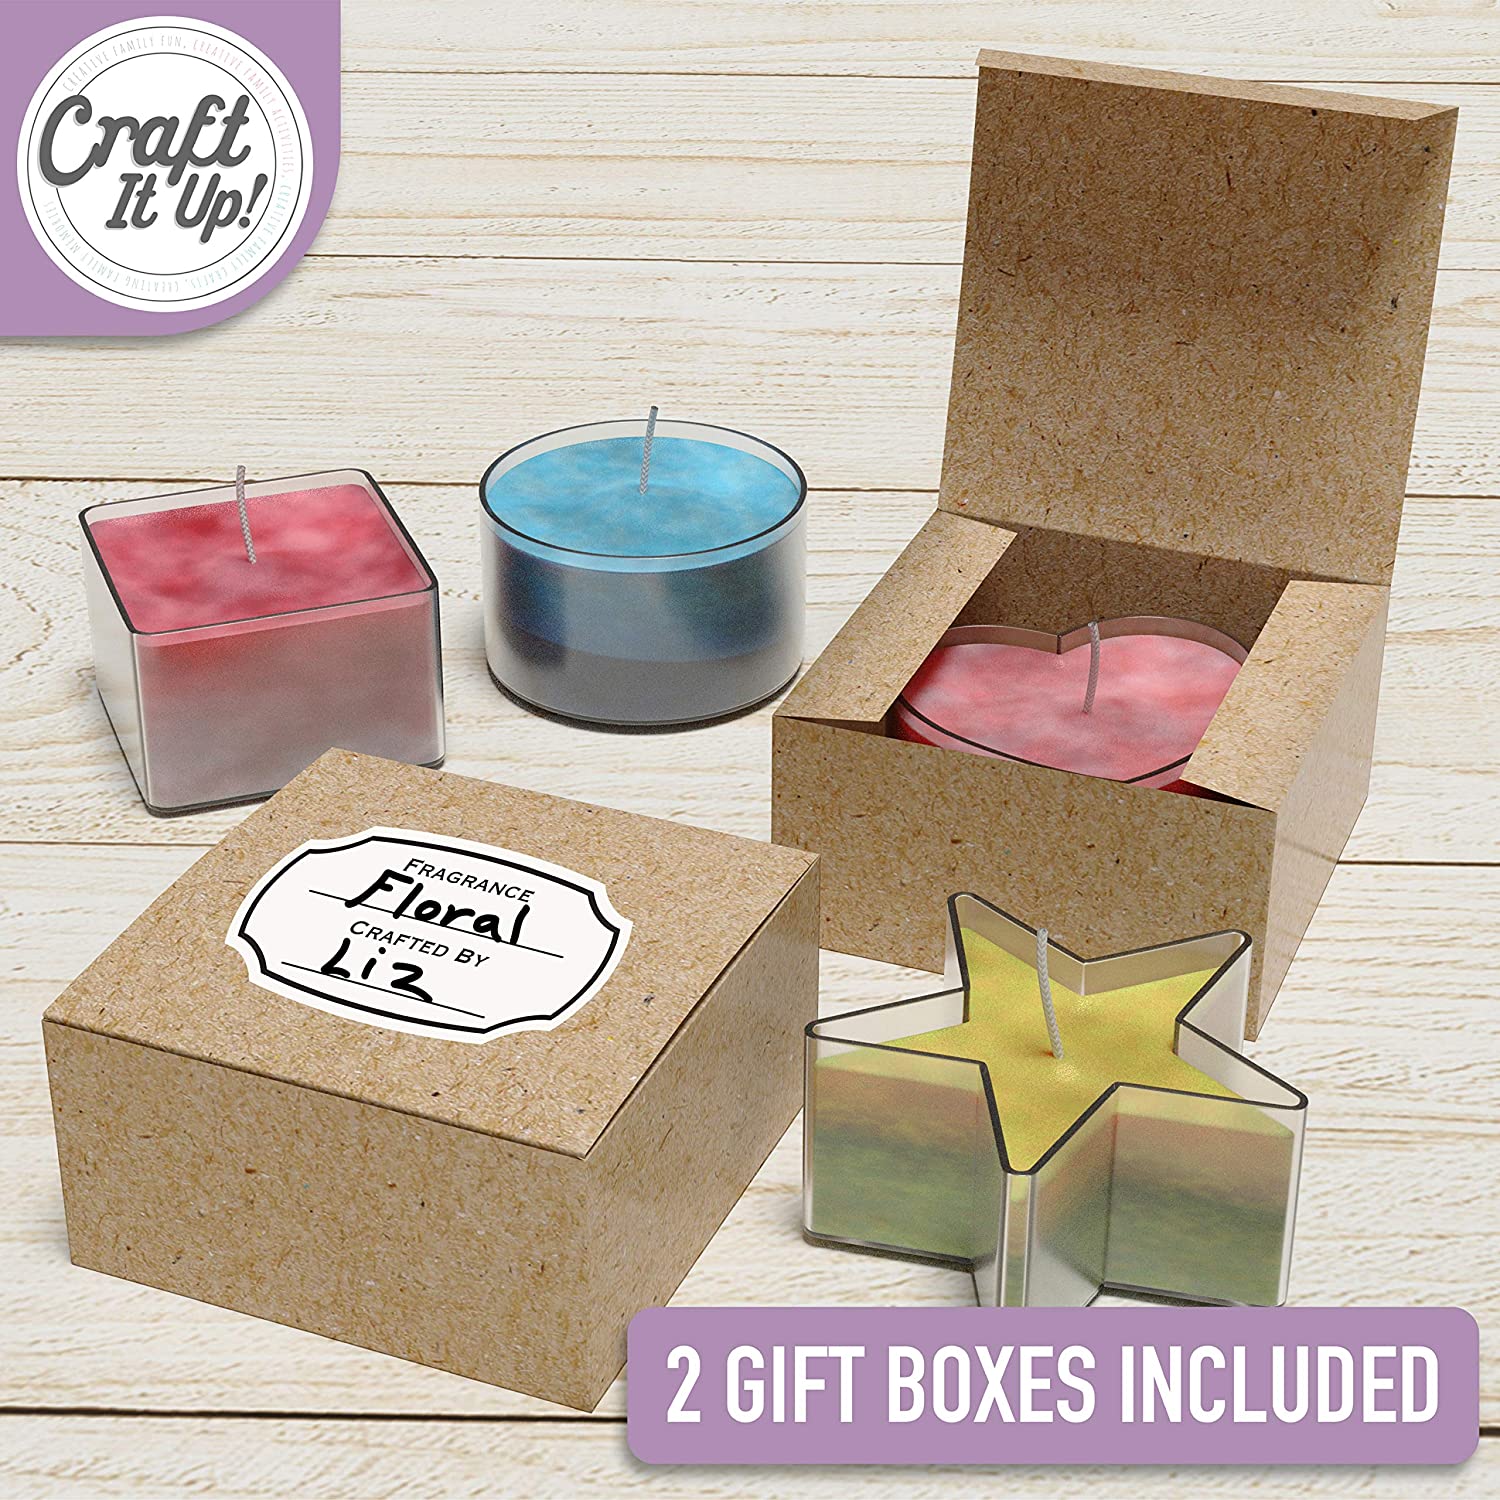 Candle Making Kit by Craft It Up! Complete DIY Beginners Set with Silicone Molds, Soy Candle Wax Supplies Plus Pot, Wicks, Essential Oils & More, Scented Homemade Candles Set for Teens & Adults - image 5 of 7